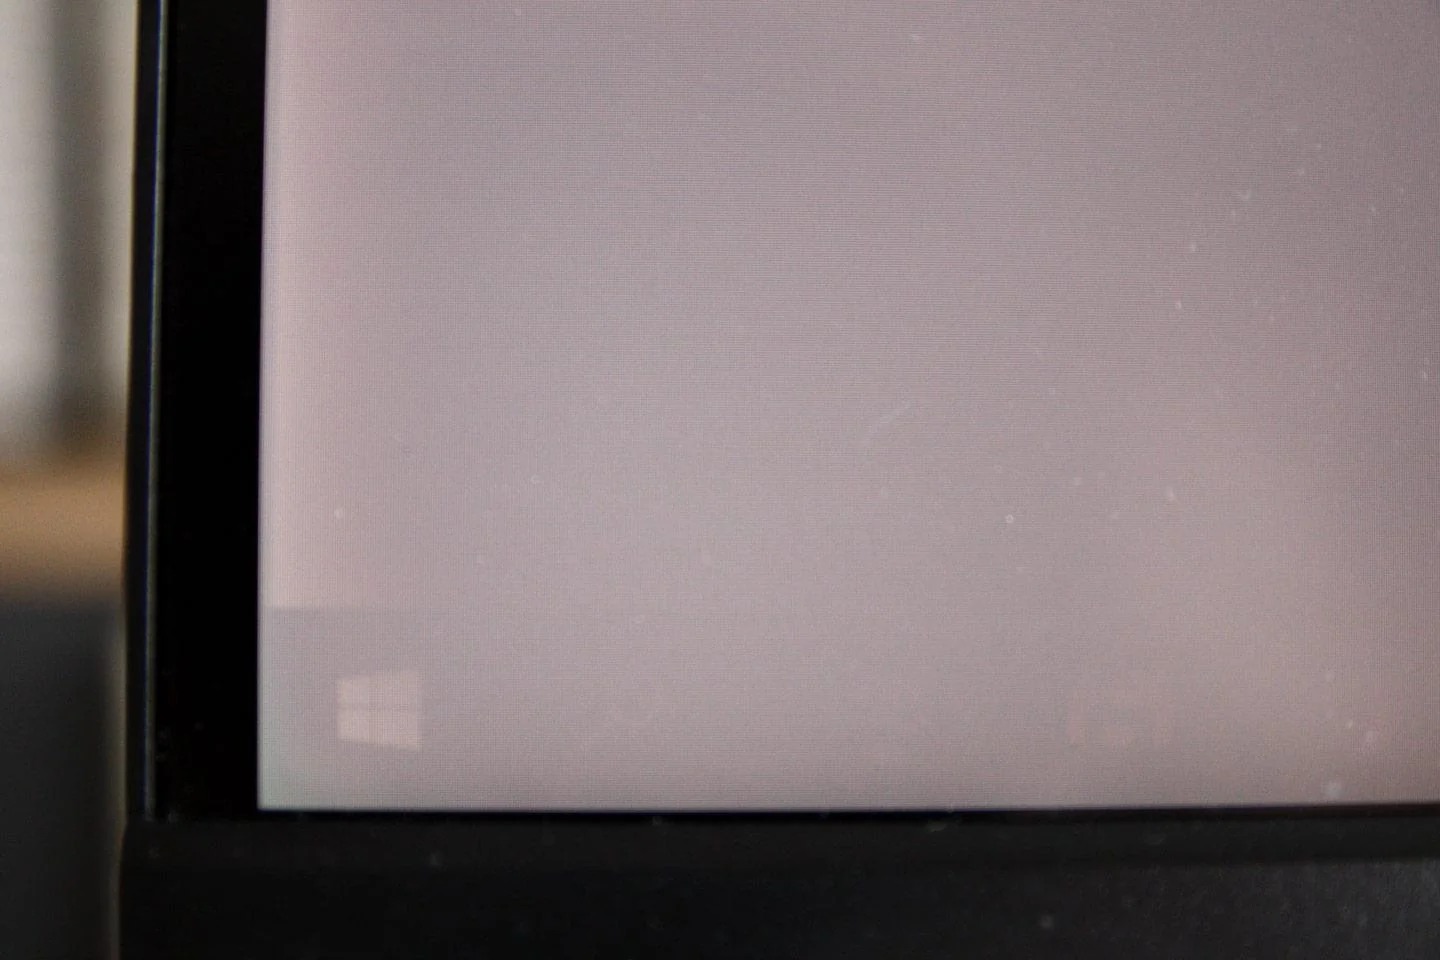 LCD Image Persistence